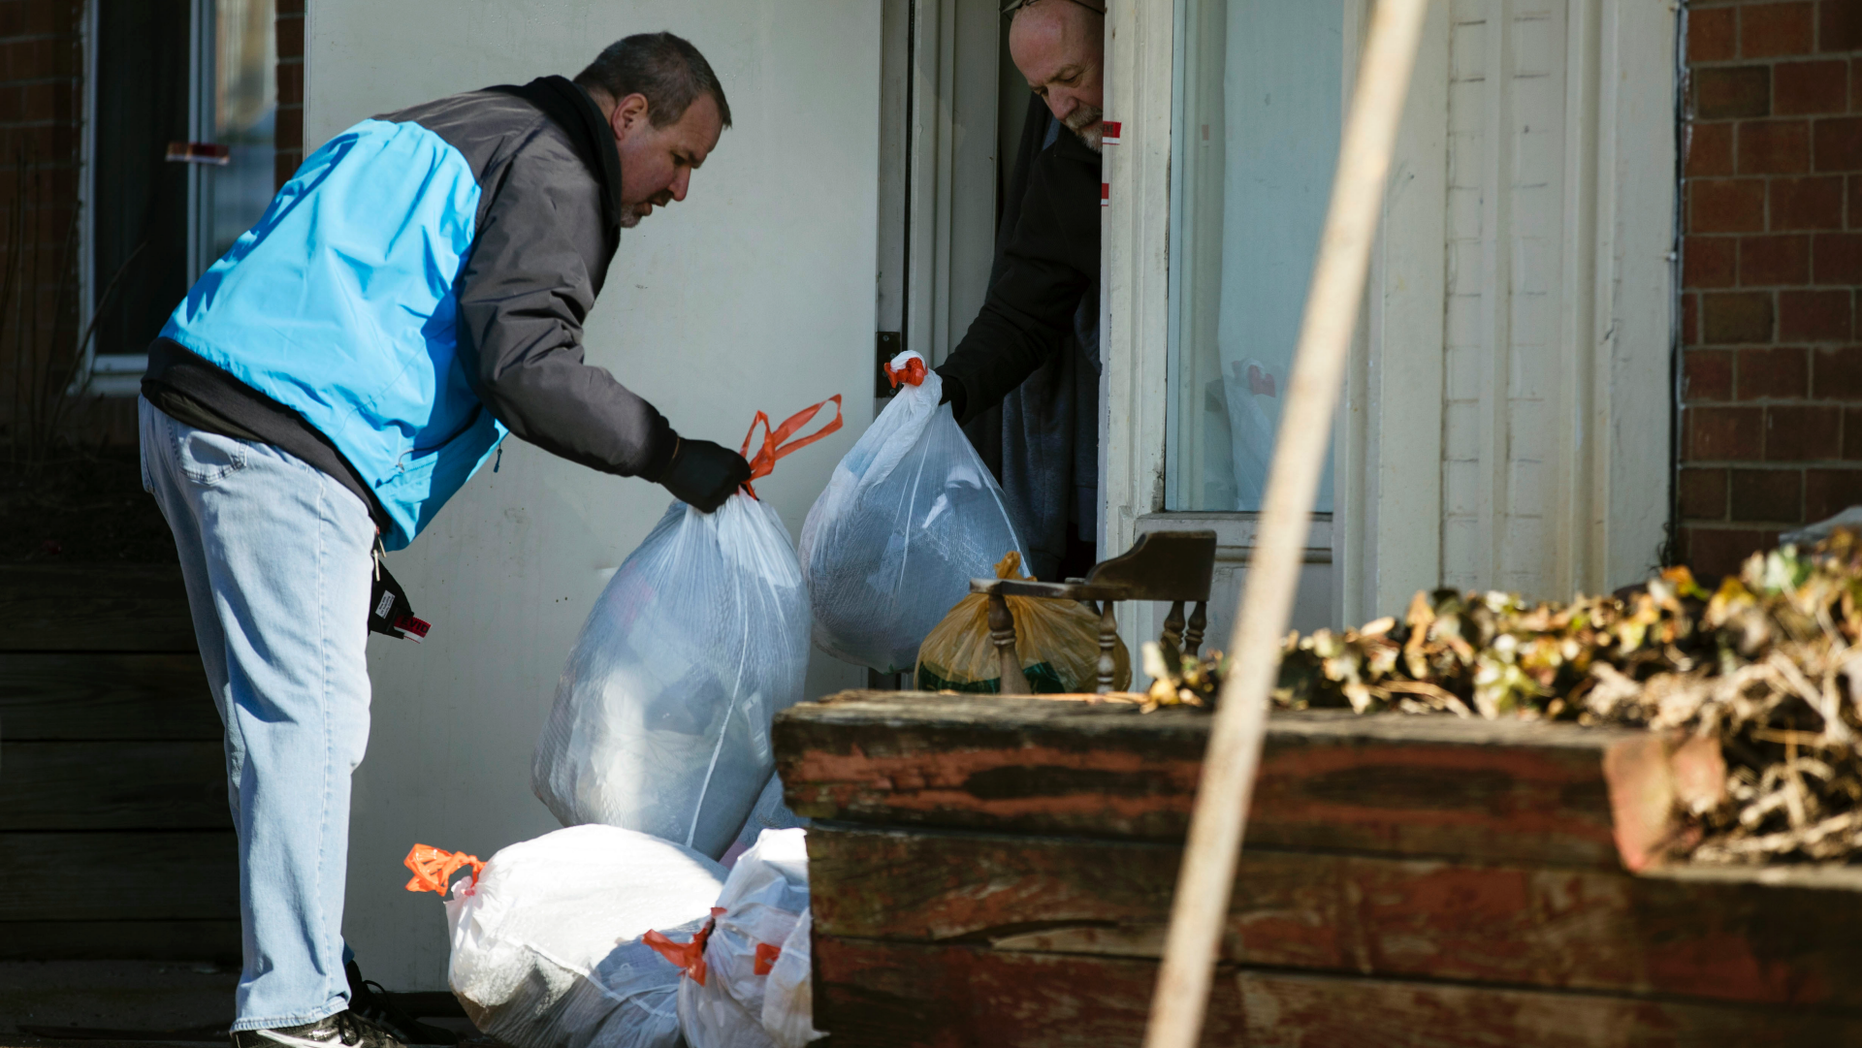 Investigators remove bags from a crime scene at the Robert Morris apartments in Morrisville, Pennsylvania, on Tuesday, February 26, 2019. A Pennsylvania woman charged with her teenage daughter for the deaths of several parents including children, has been brought to justice for murder charges. The bodies were found Monday in an apartment complex. (AP Photo / Matt Rourke)